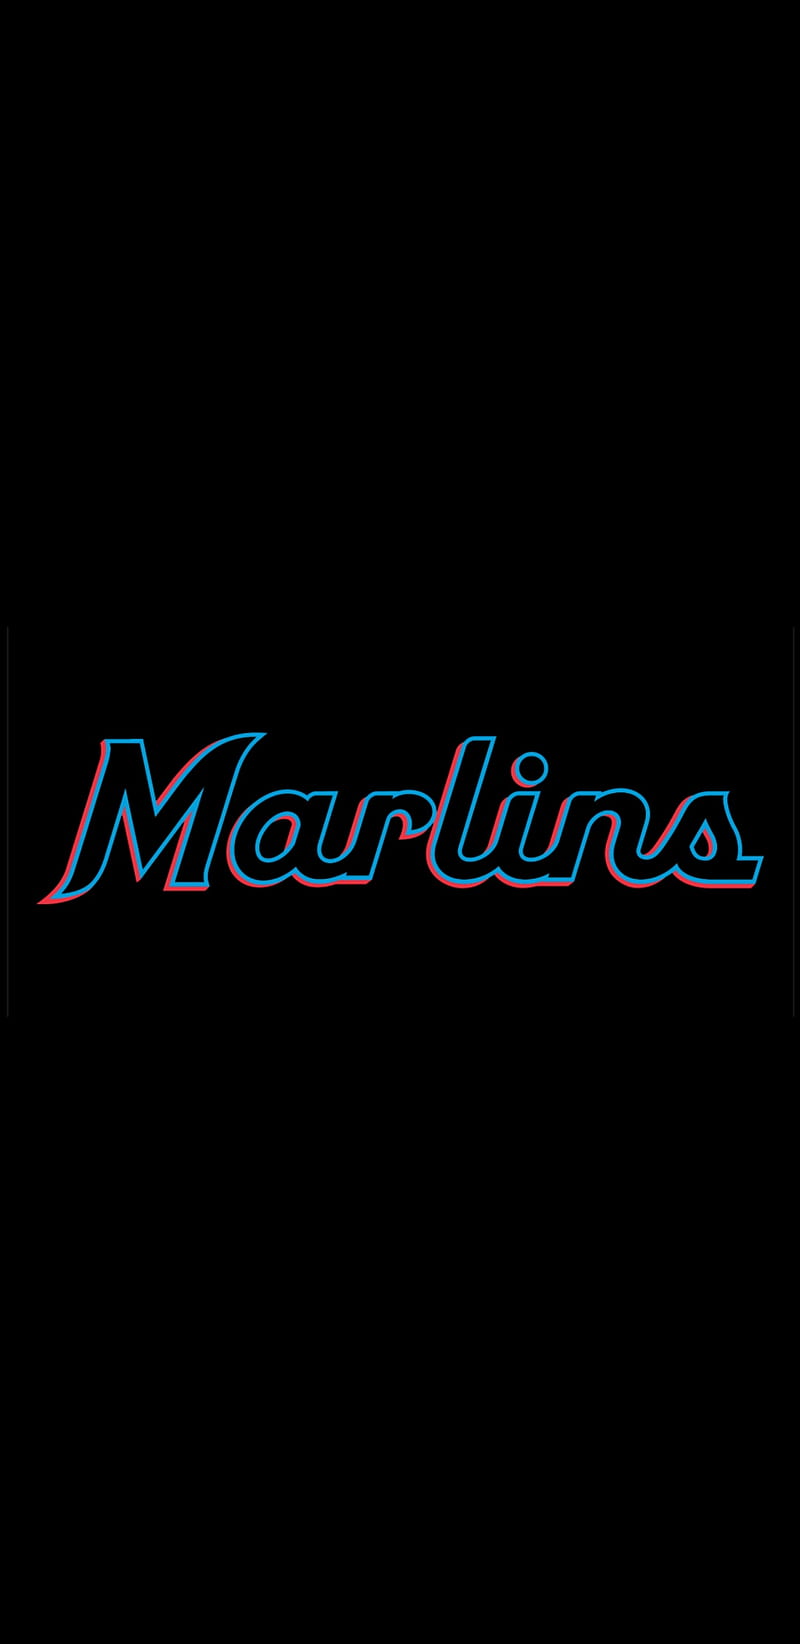 Download wallpapers miami marlins for desktop free. High Quality